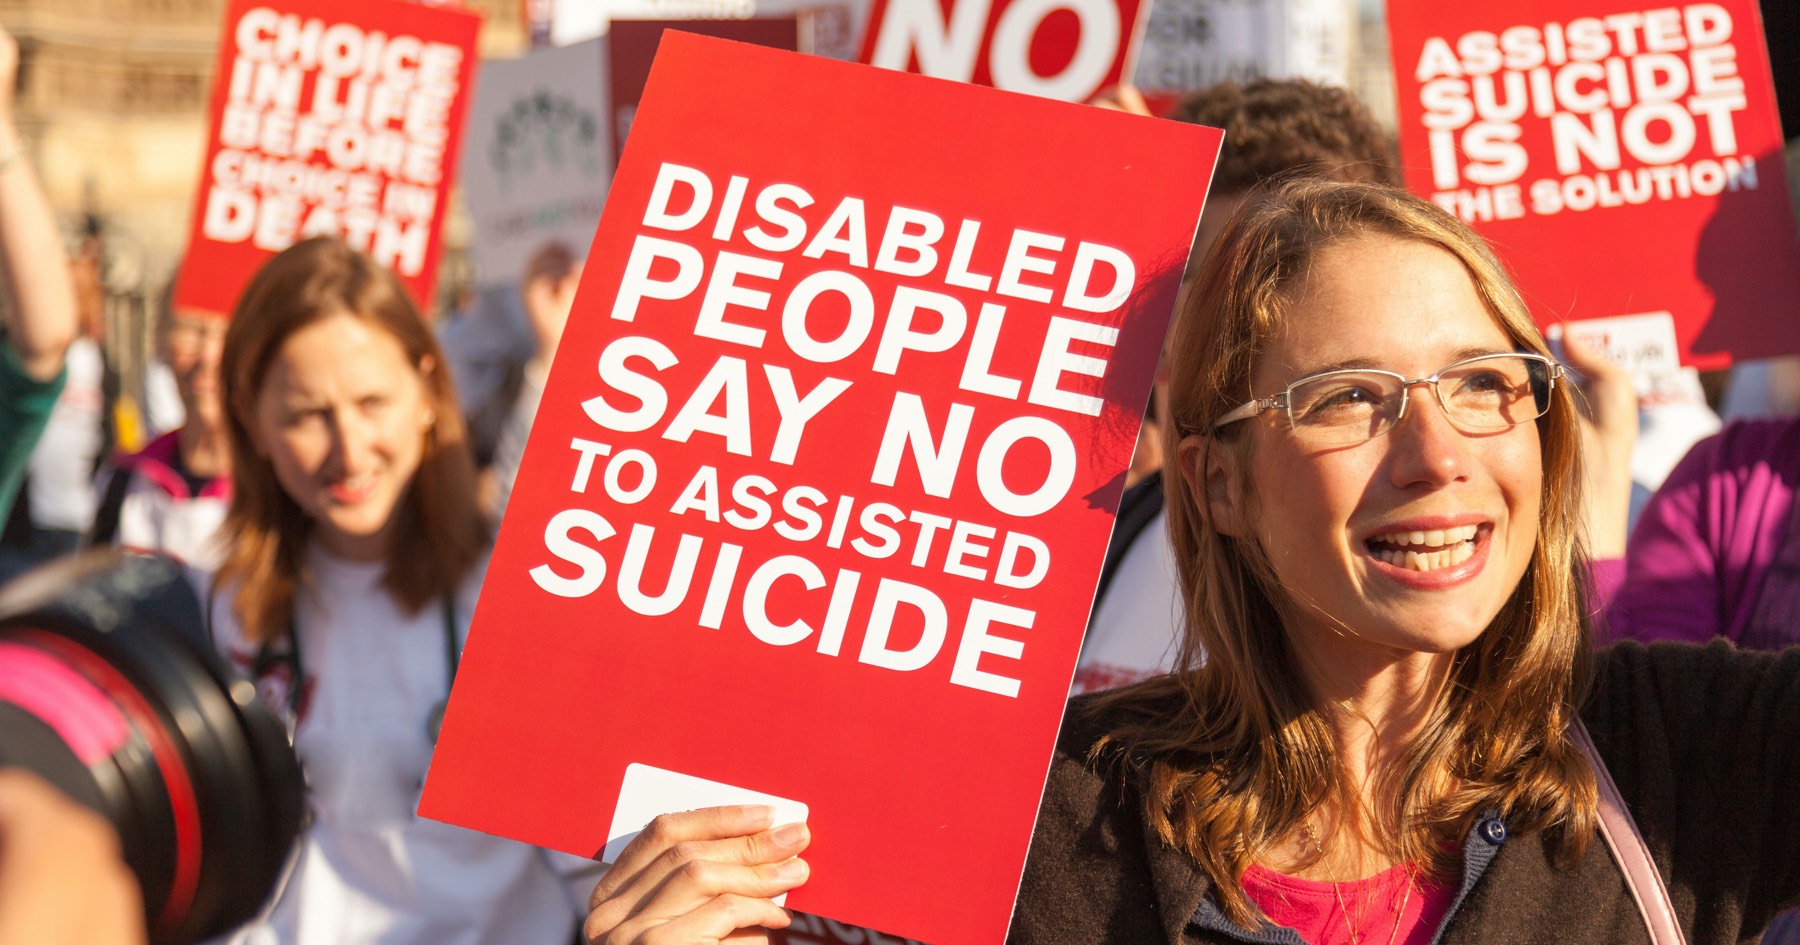 Ask-your-MP-to-attend-a-parliamentary-event-from-experts-on-why-the-UK-shouldnt-legalise-assisted-suicide-share-1